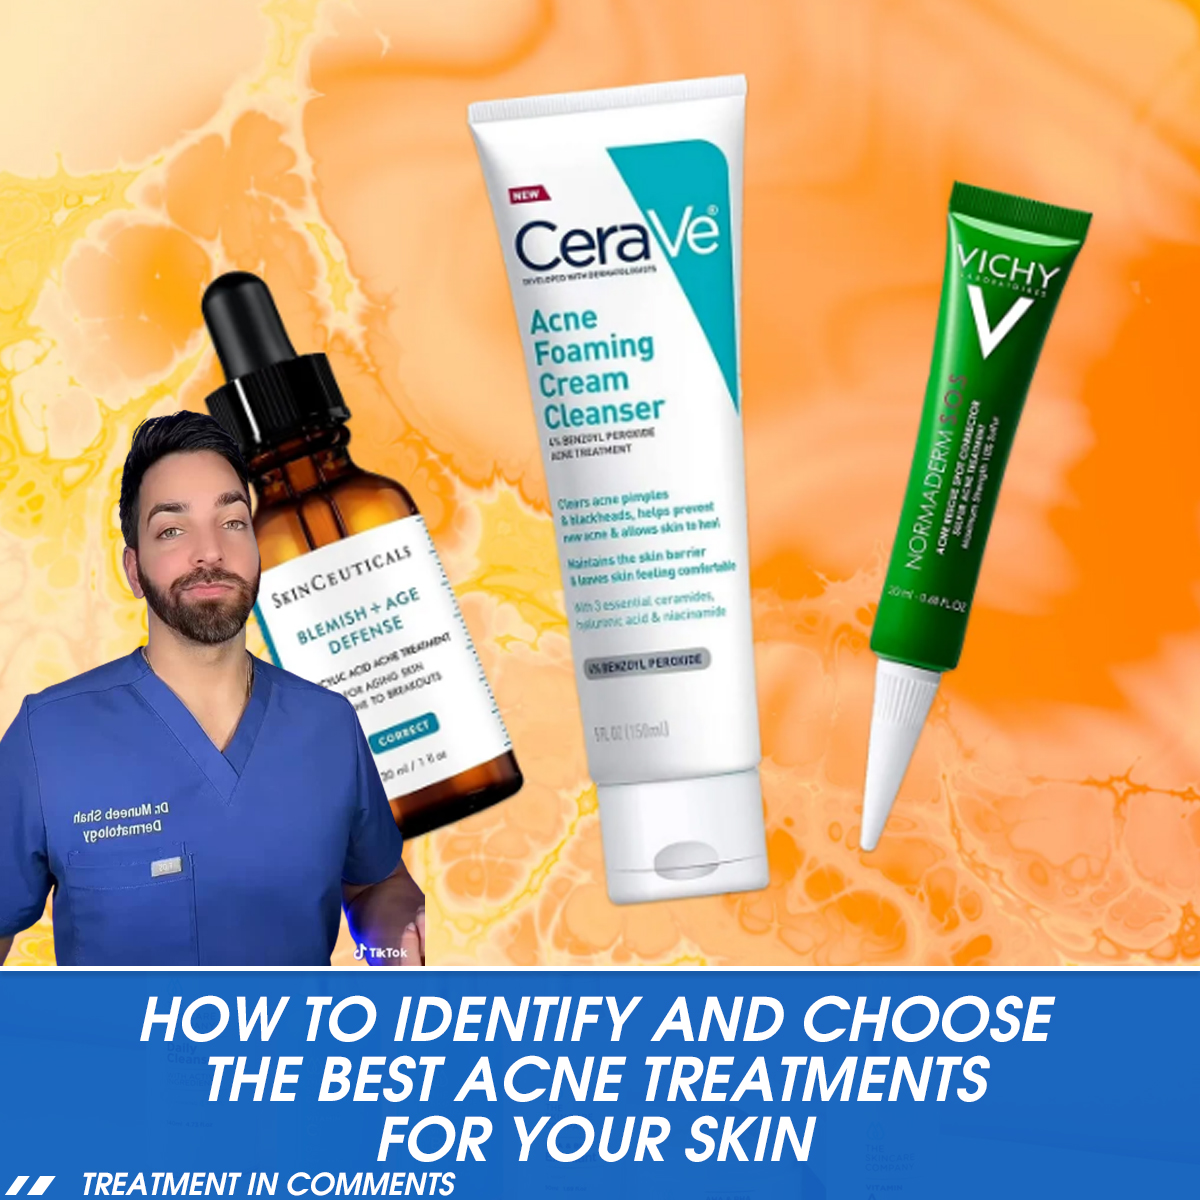 How to Identify and Choose the Best Acne Treatments For Your Skin